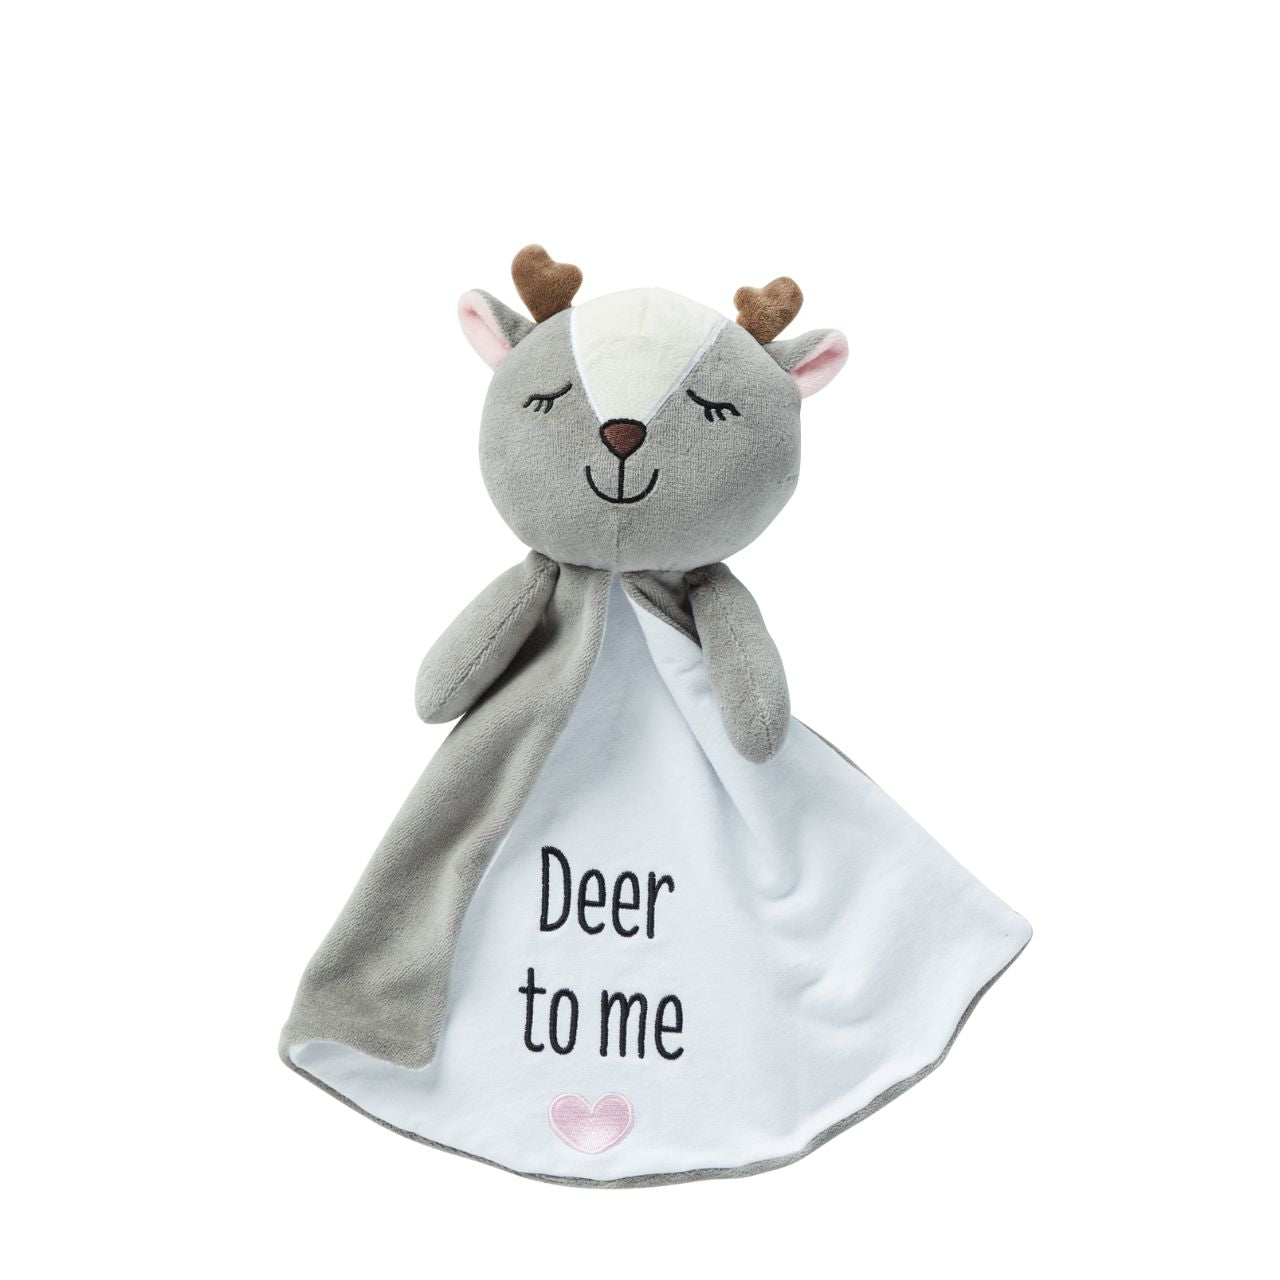 Reindeer Tag-A-Long  Super soft Reindeer Tag-A-Long is perfect for any baby. Suitable from 0m+, this Reindeer can be machine washed and is perfect for comfort on the go.